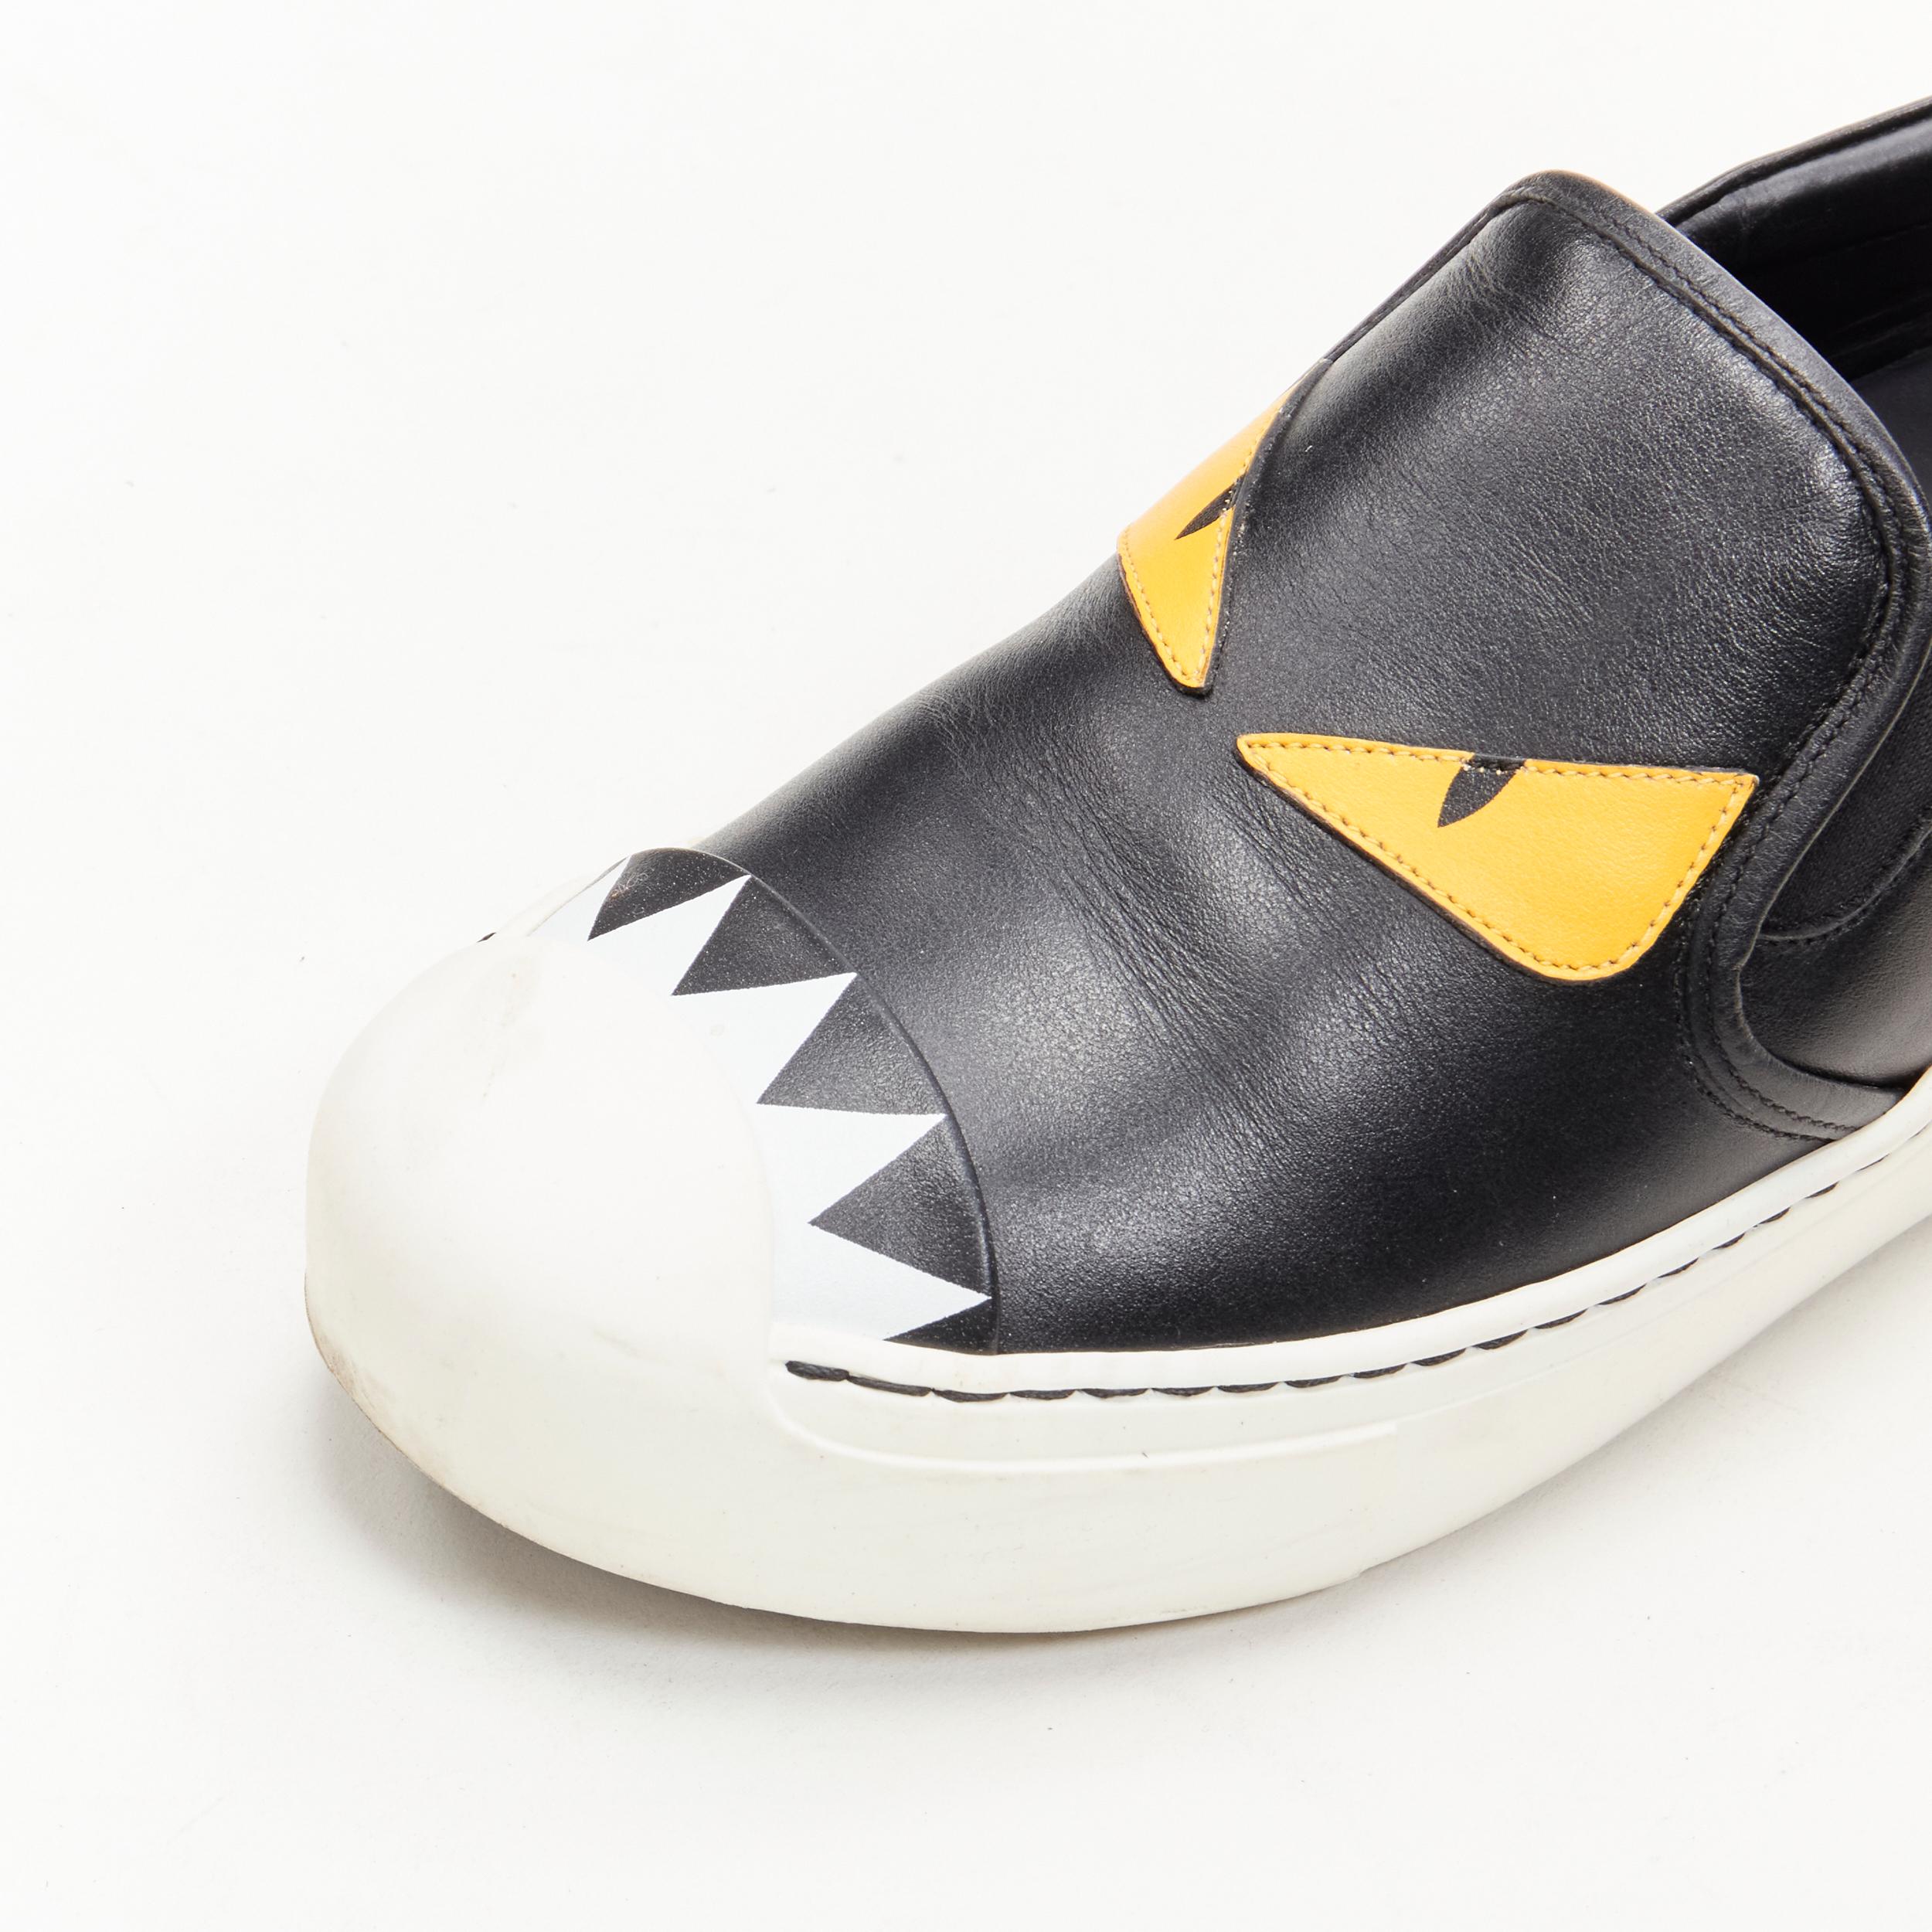 FENDI Monster Bug Eye black yellow leather slip on skate sneakers shoes EU36.5 In Good Condition For Sale In Hong Kong, NT